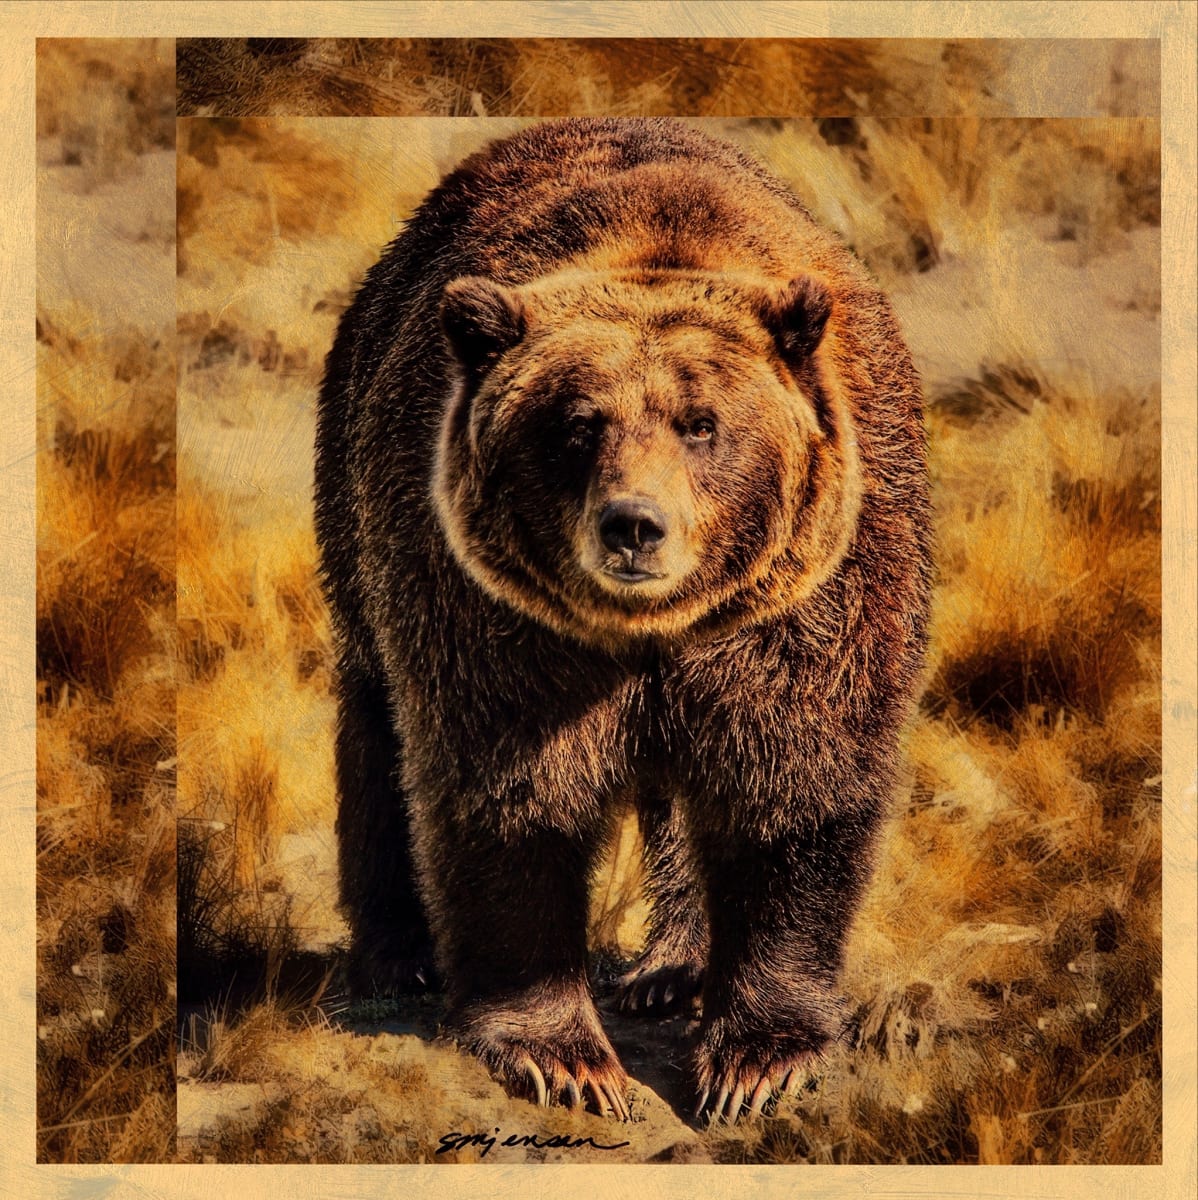 Golden Grizzly by Sandy Brown Jensen, I Dream in Gold  Image: Golden Grizzly